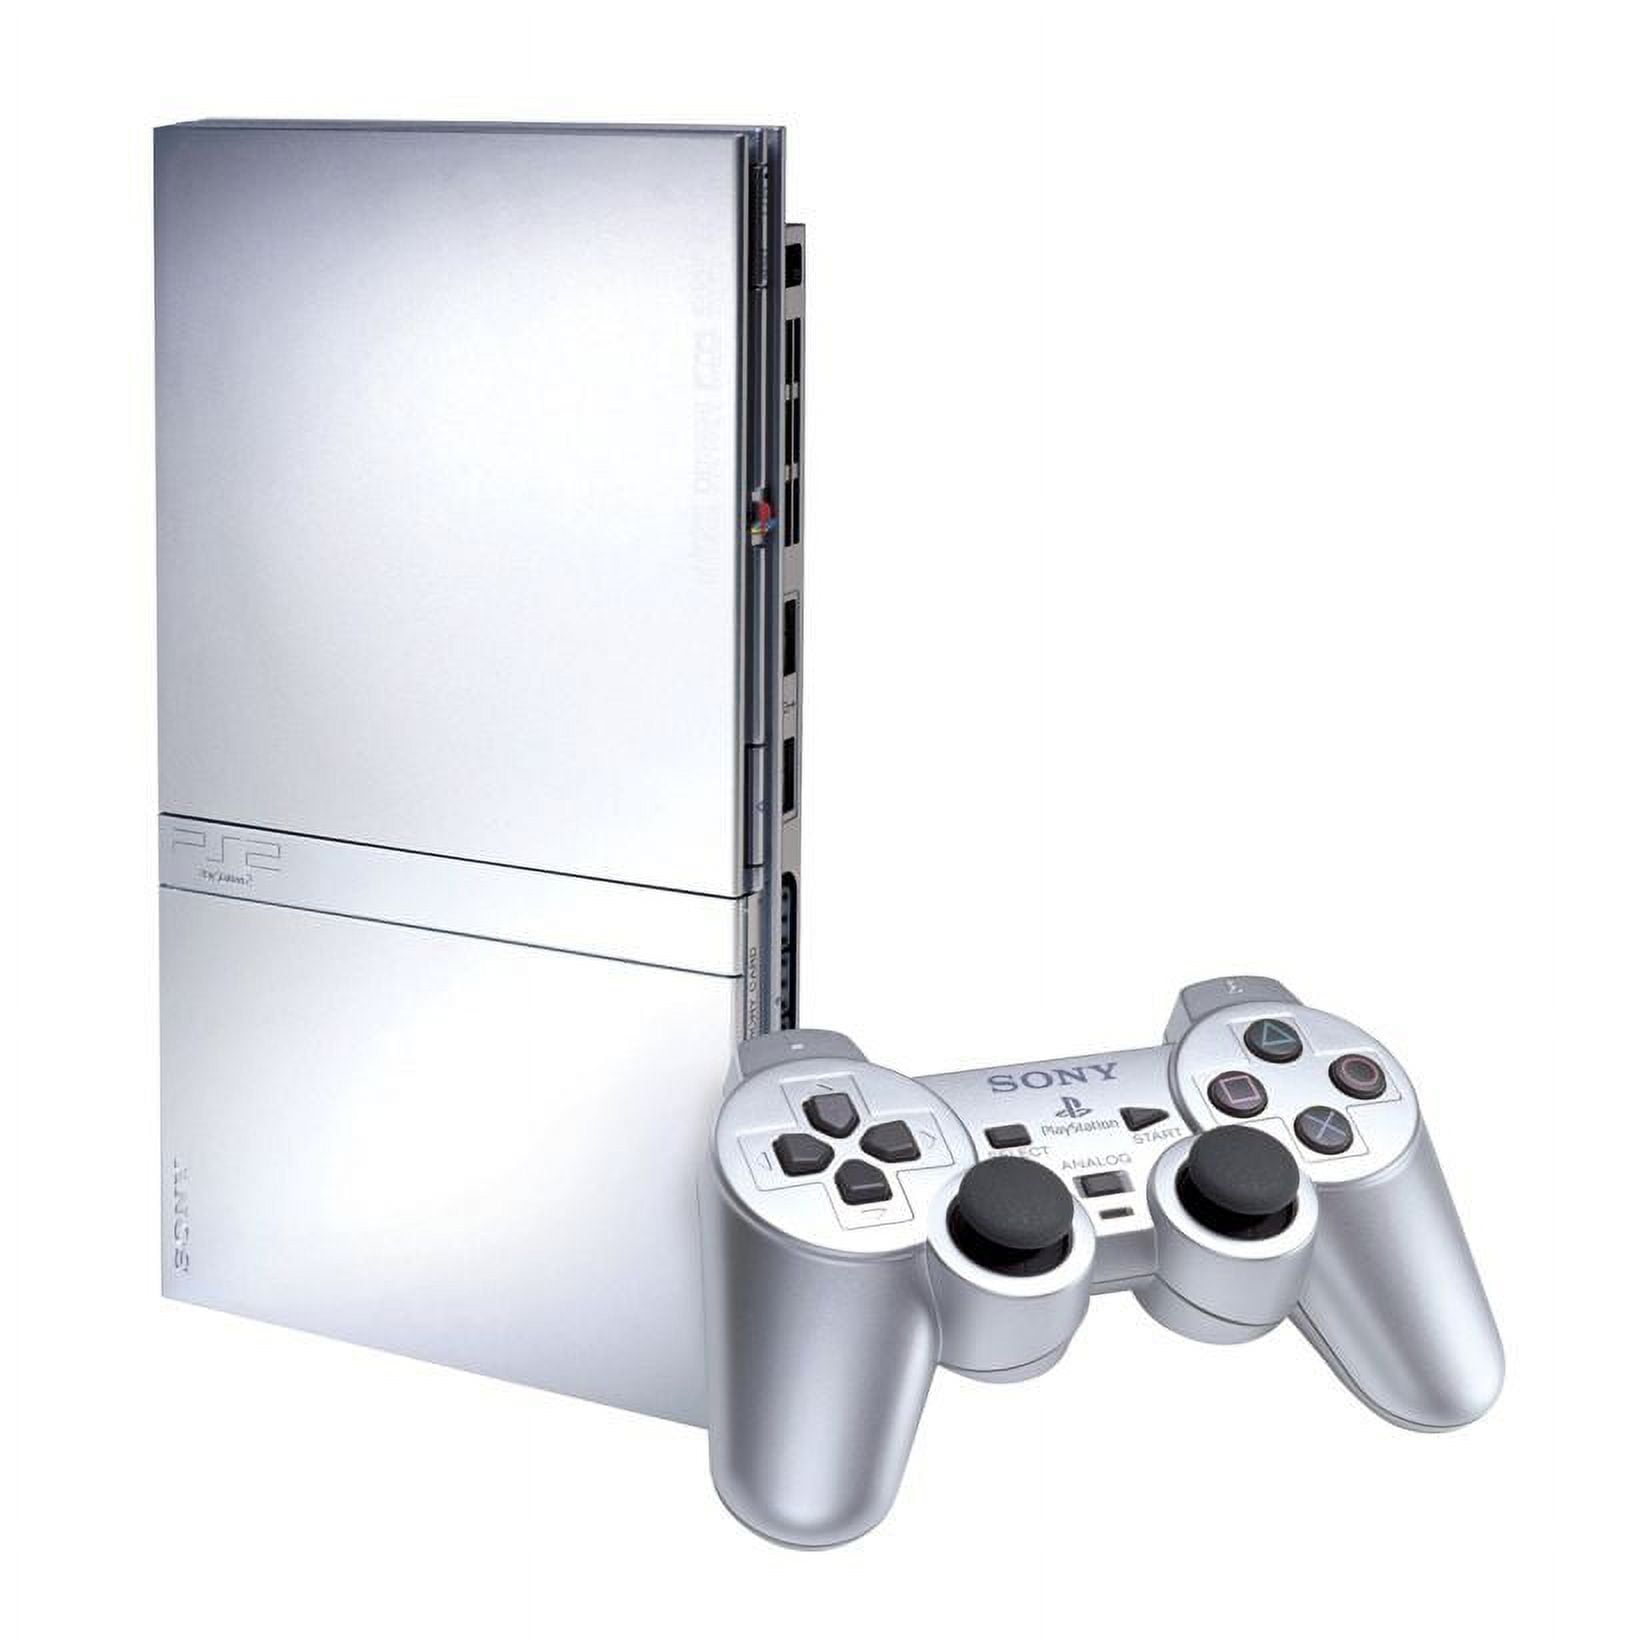 Sony PlayStation 2 Slim Overview - Consolevariations, sony playstation 2 